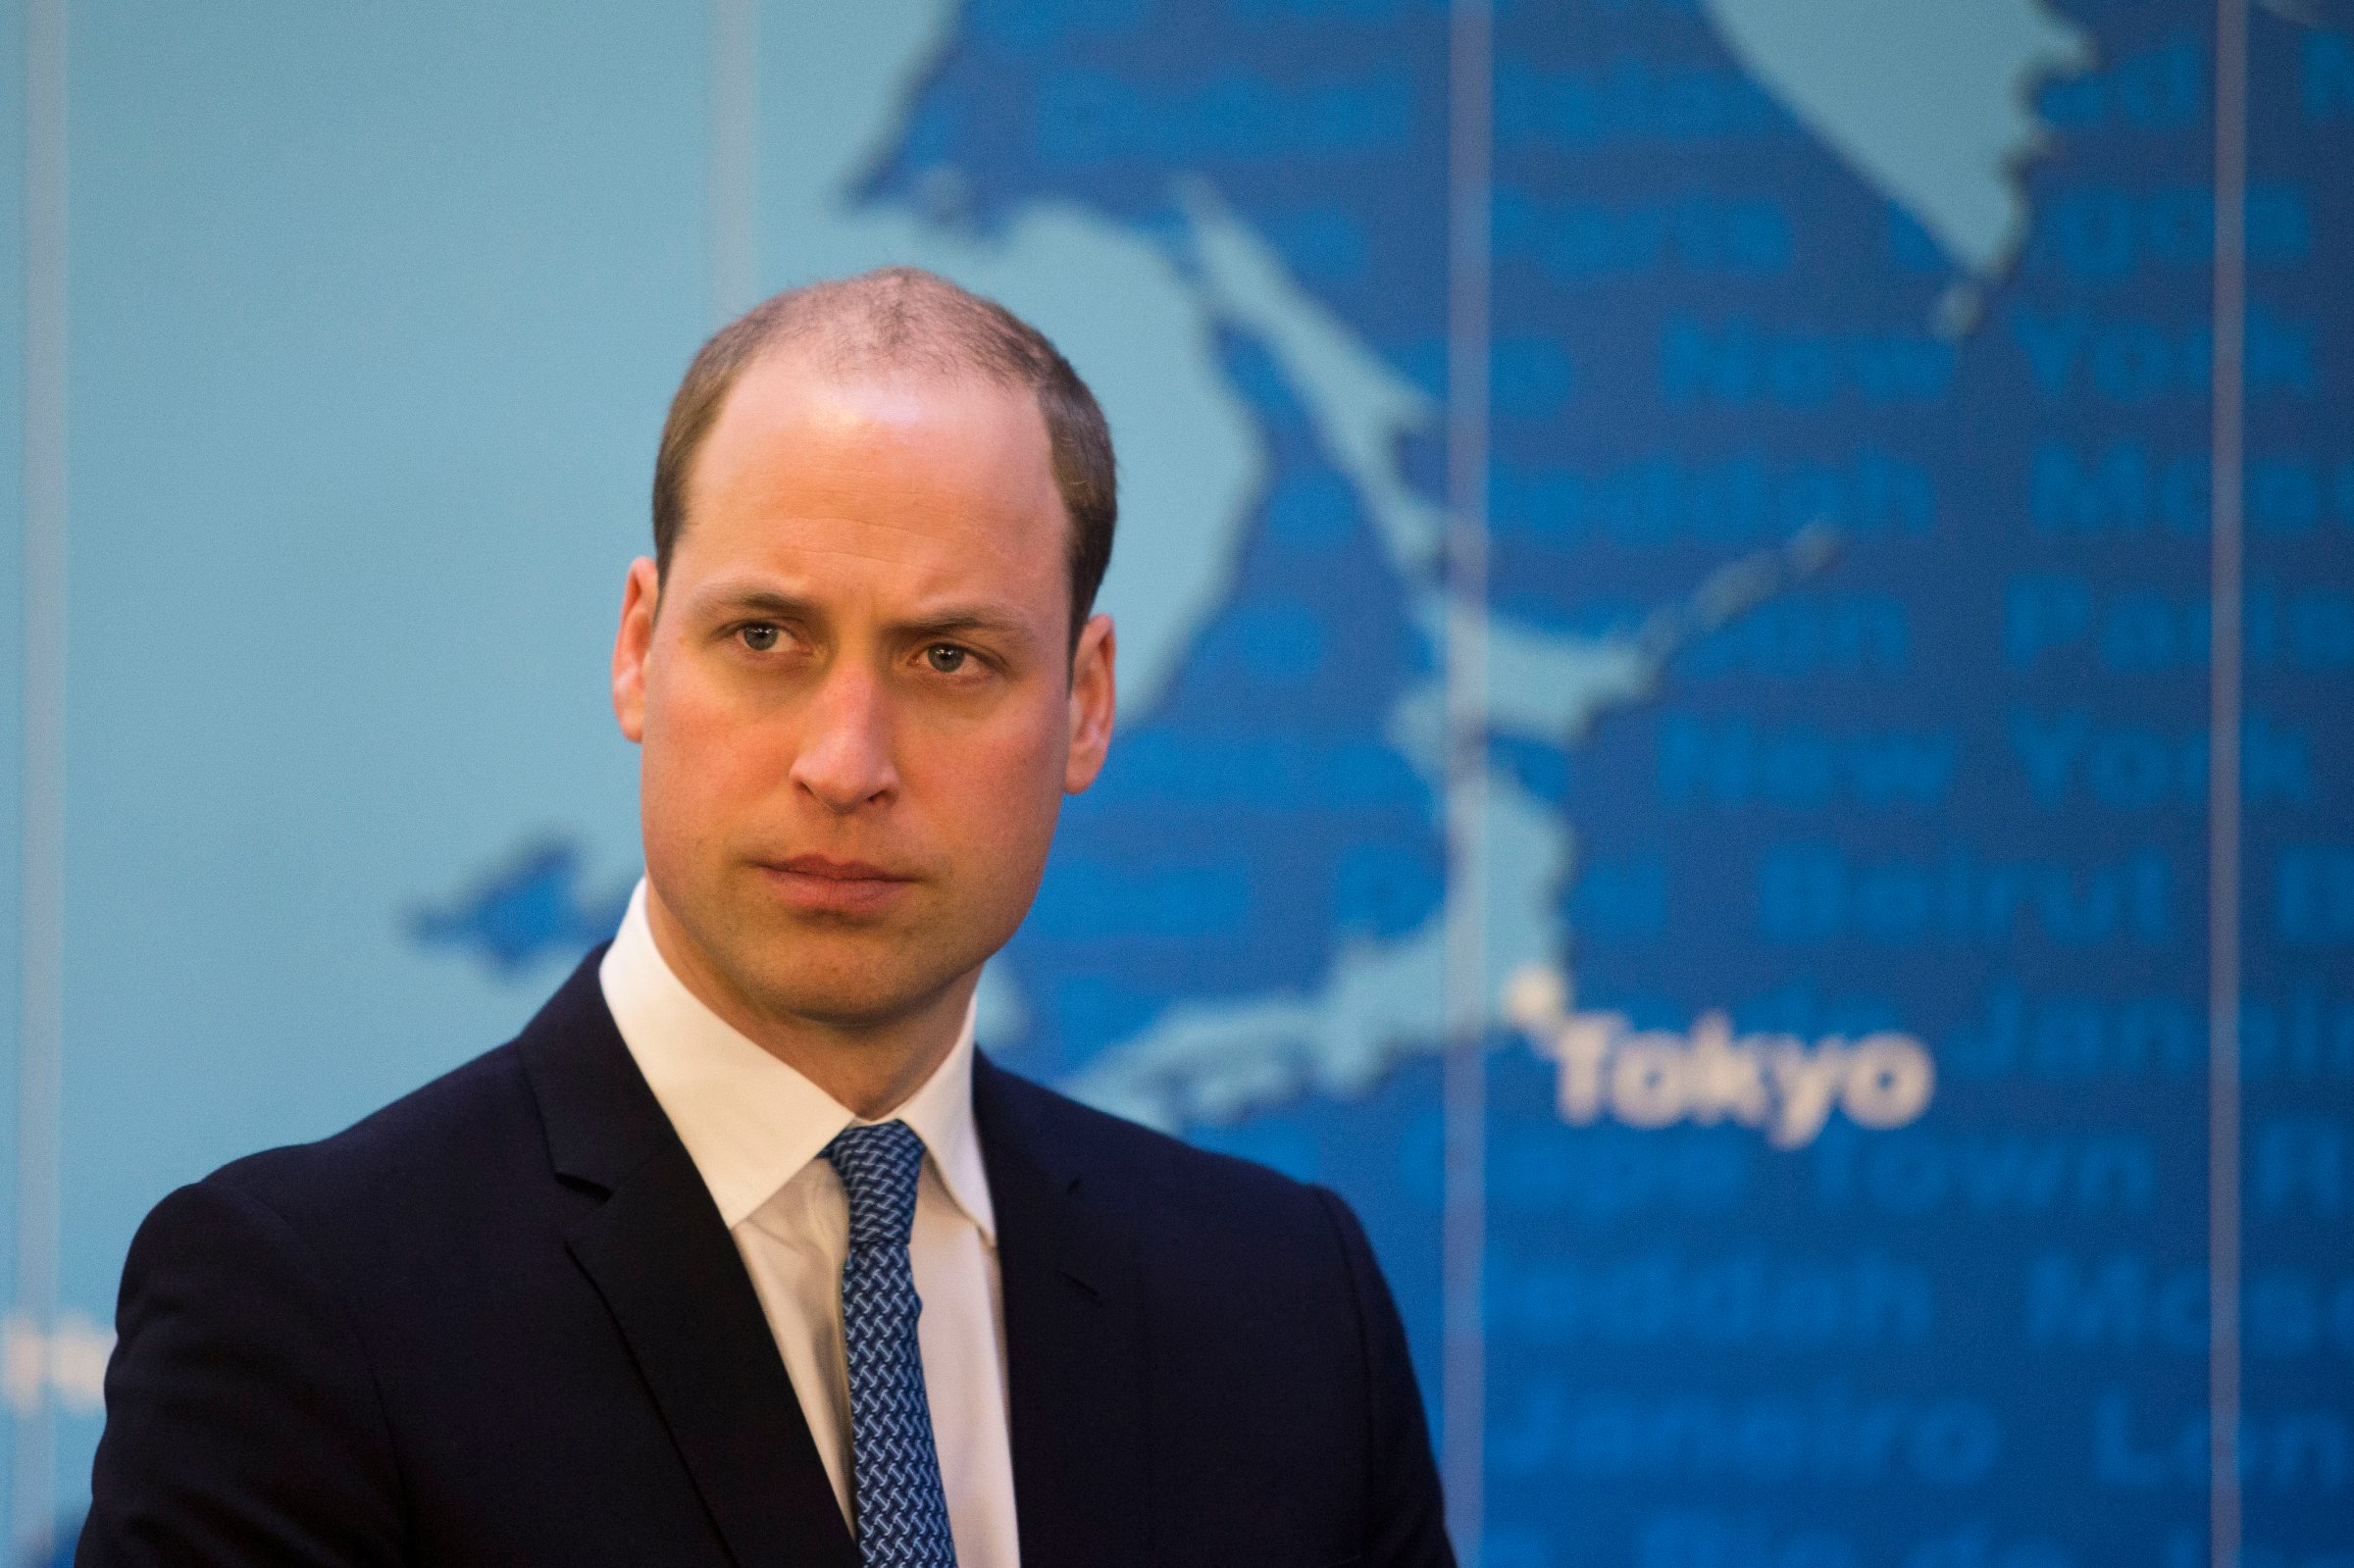 The Duke Of Cambridge Marks 1st Anniversary Of The FCO Diplomatic Academy